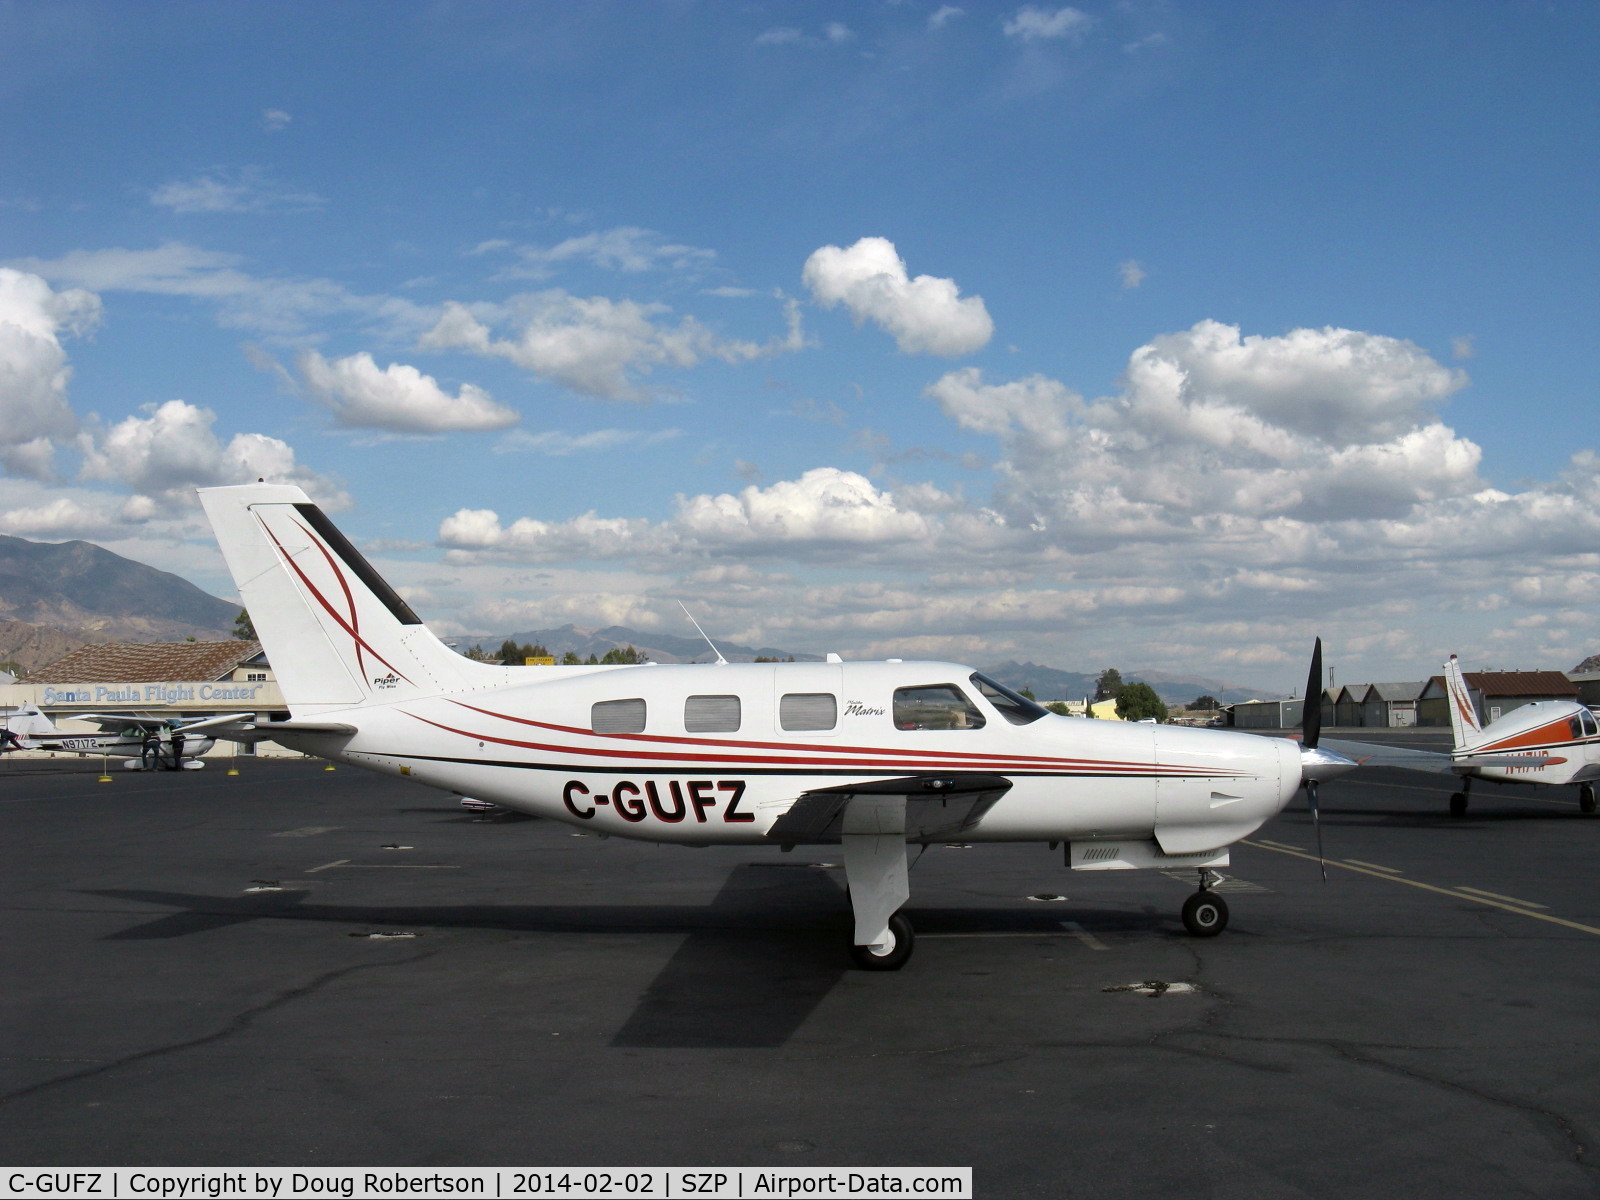 C-GUFZ, 2008 Piper PA-46R-350T Malibu Matrix C/N 4692072, 2008 Piper PA-46R-350T MALIBU MATRIX, Lycoming TIO-540-AE2A Turbocharged 350 Hp, 3-blade CS composite (Kevlar) prop, pressurized, heated & air-conditioned for 6, max certified altitude 25,000', max cruise at FL250 213 kts 245 mph. De-icer boots wings/tail